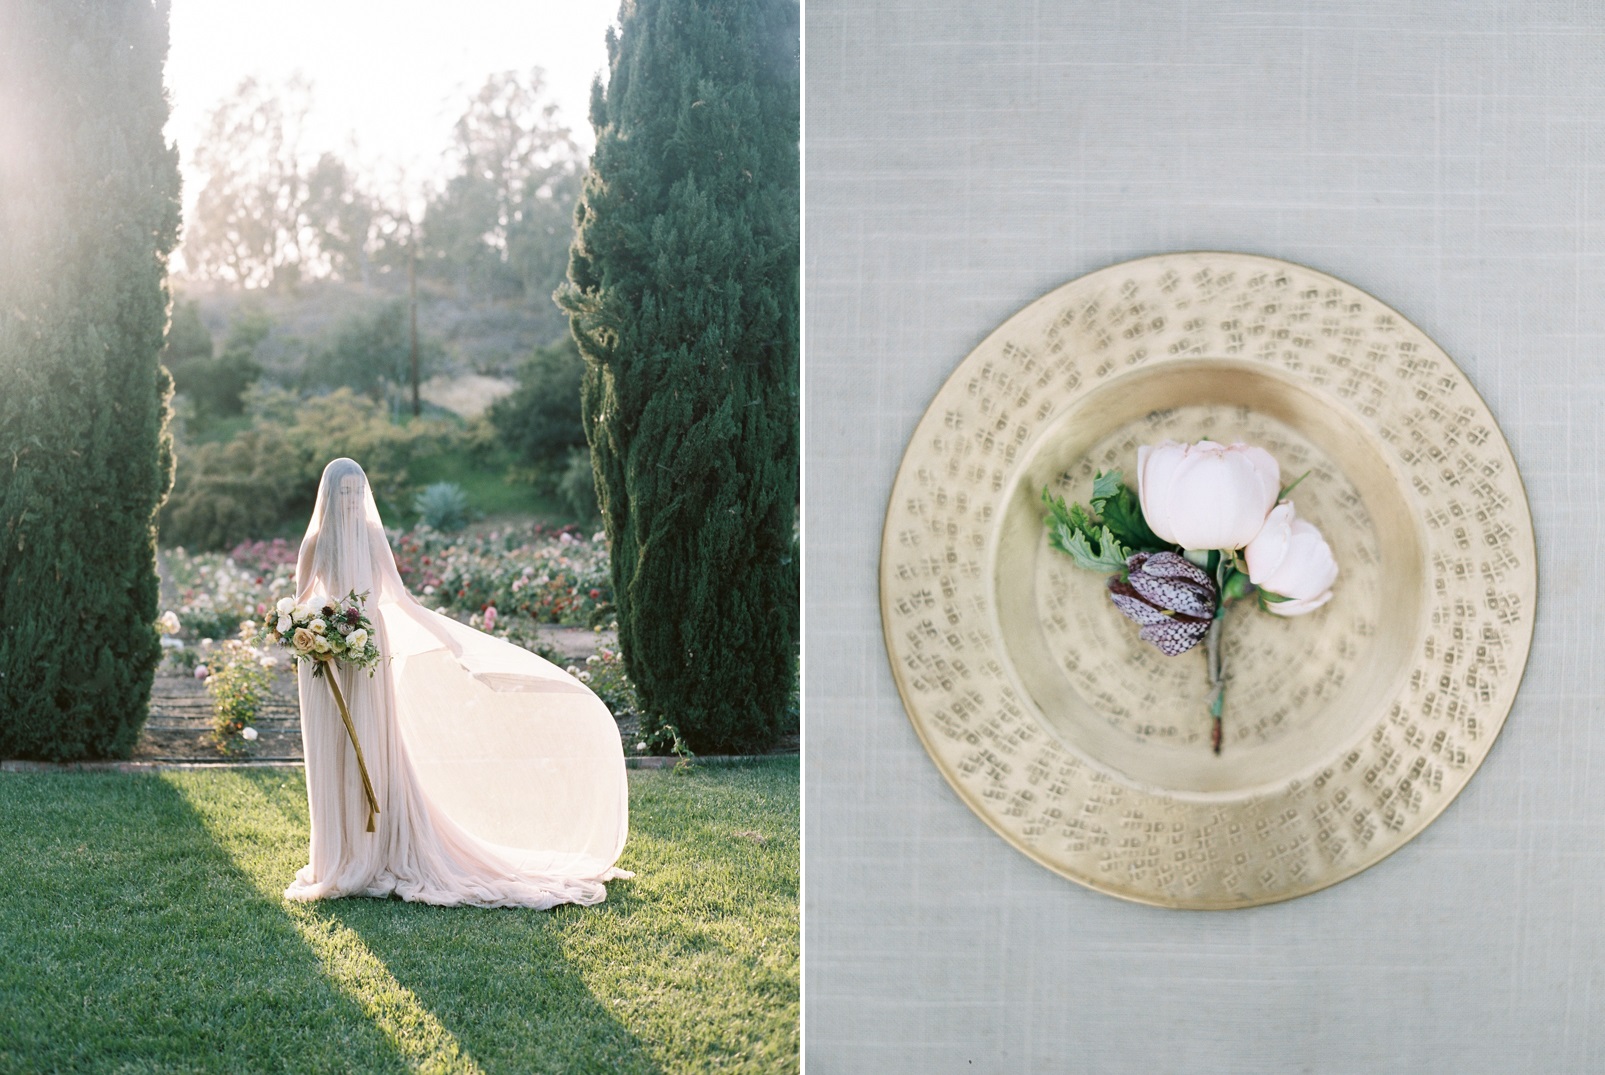 Bride & Bouquet - Dreamy Garden Wedding Inspiration with a Hint of Provence